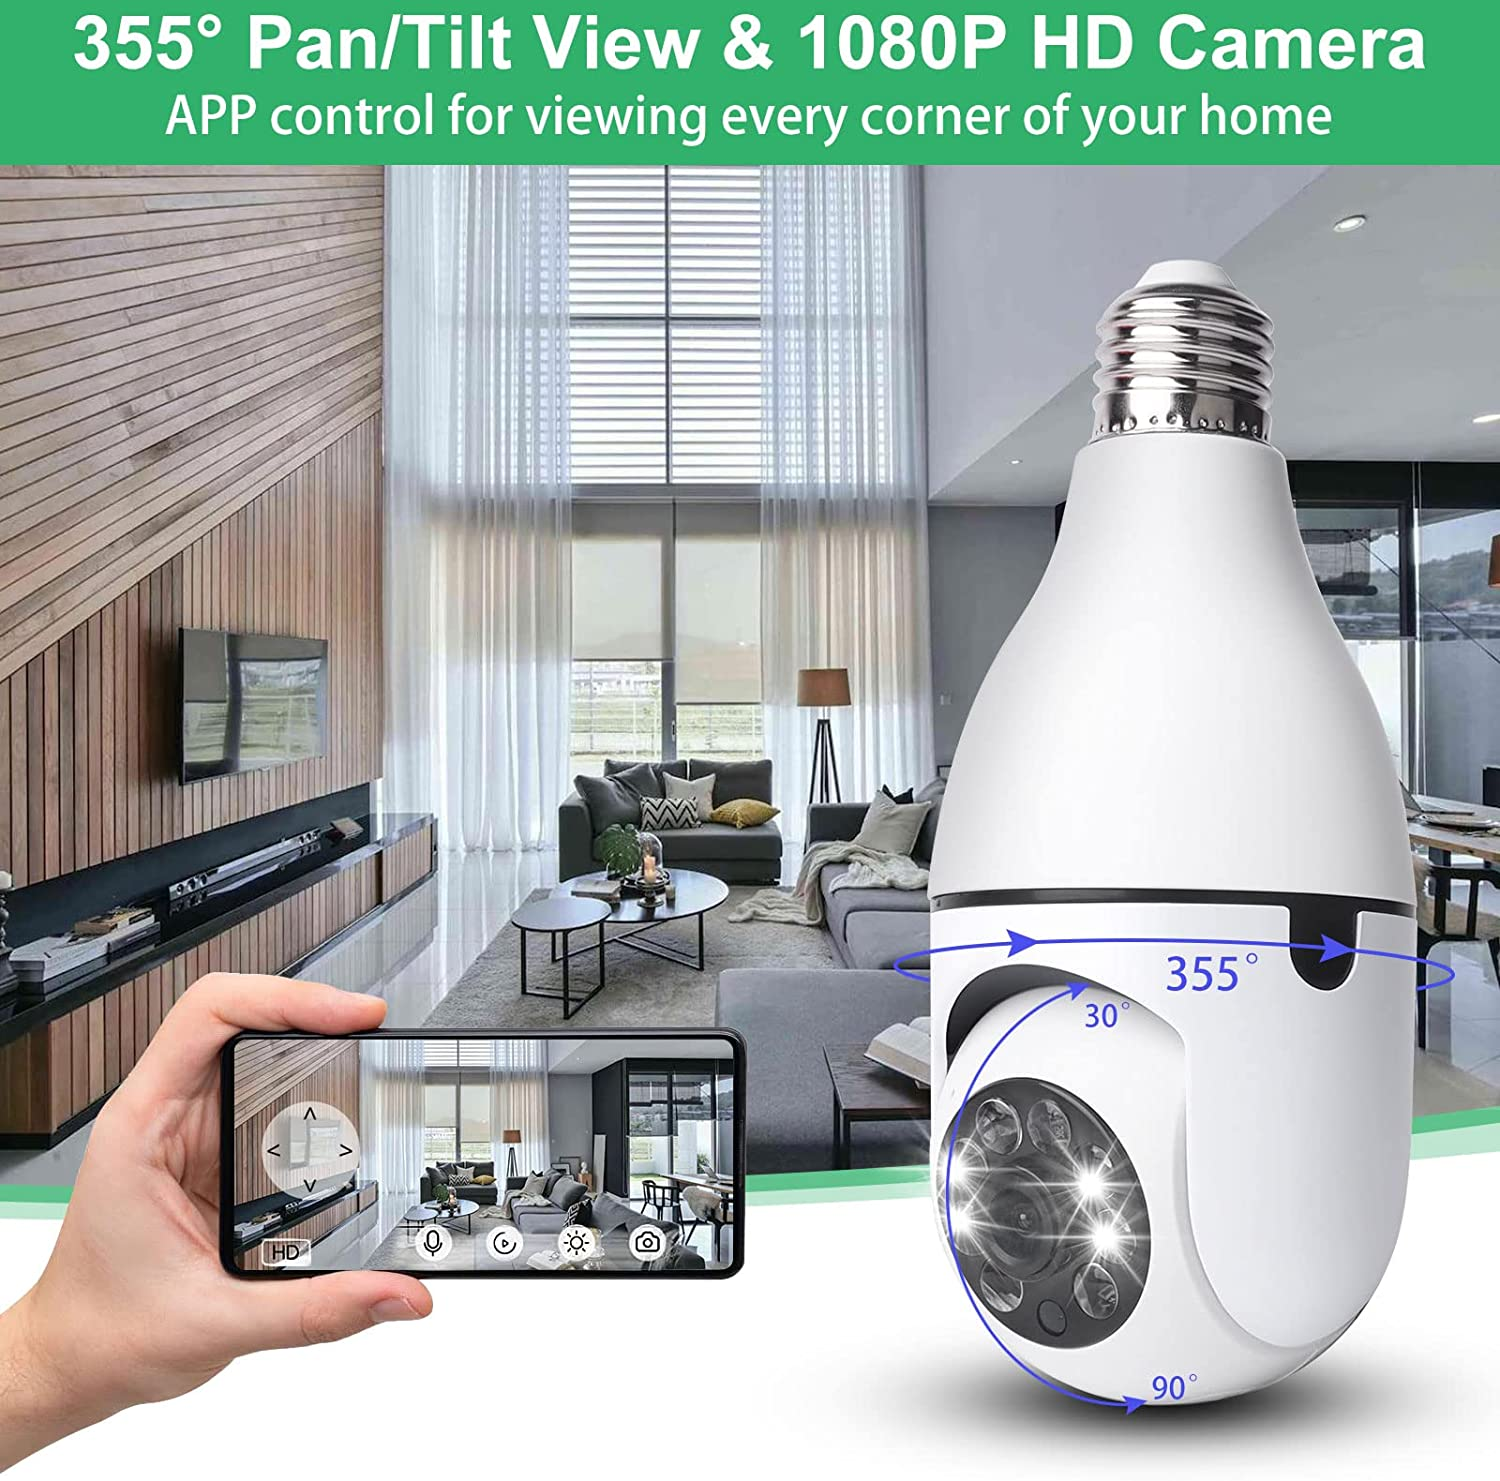 1080P Light Bulb Camera, Wireless Home Security Camera with 2.4Ghz Wifi, 360 Degree Smart Surveillance Cam with Motion Detection Alarm Night Vision(No Micro SD Card)